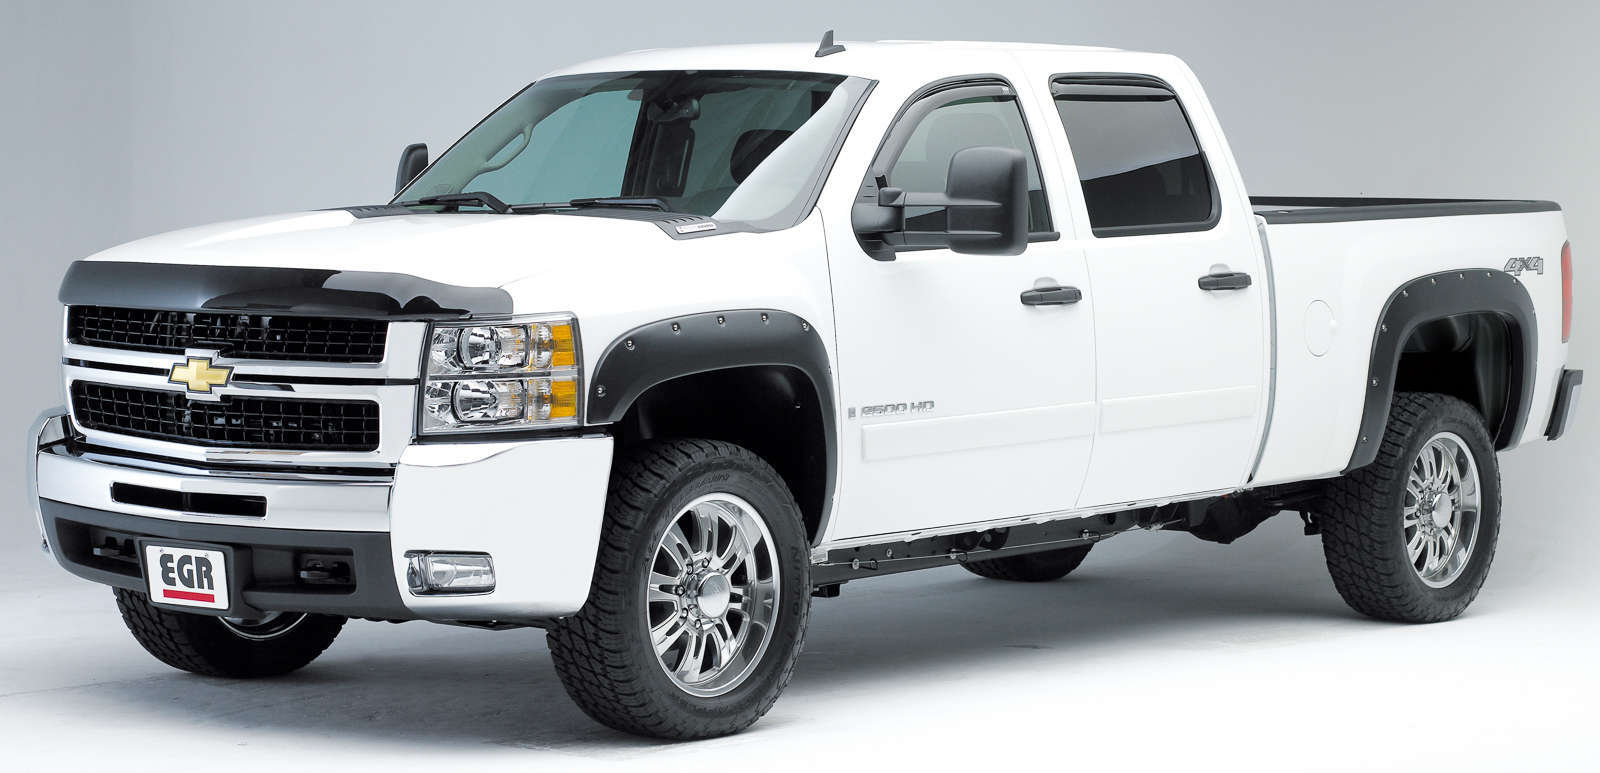 EGR 2007-2013 Chevrolet Silverado 1500 Crew Cab Extended Cab Standard Cab Pickup 2 4 Door Short Box Only Set Of 4 Traditional Bolt-On Look Fender Flares 791404